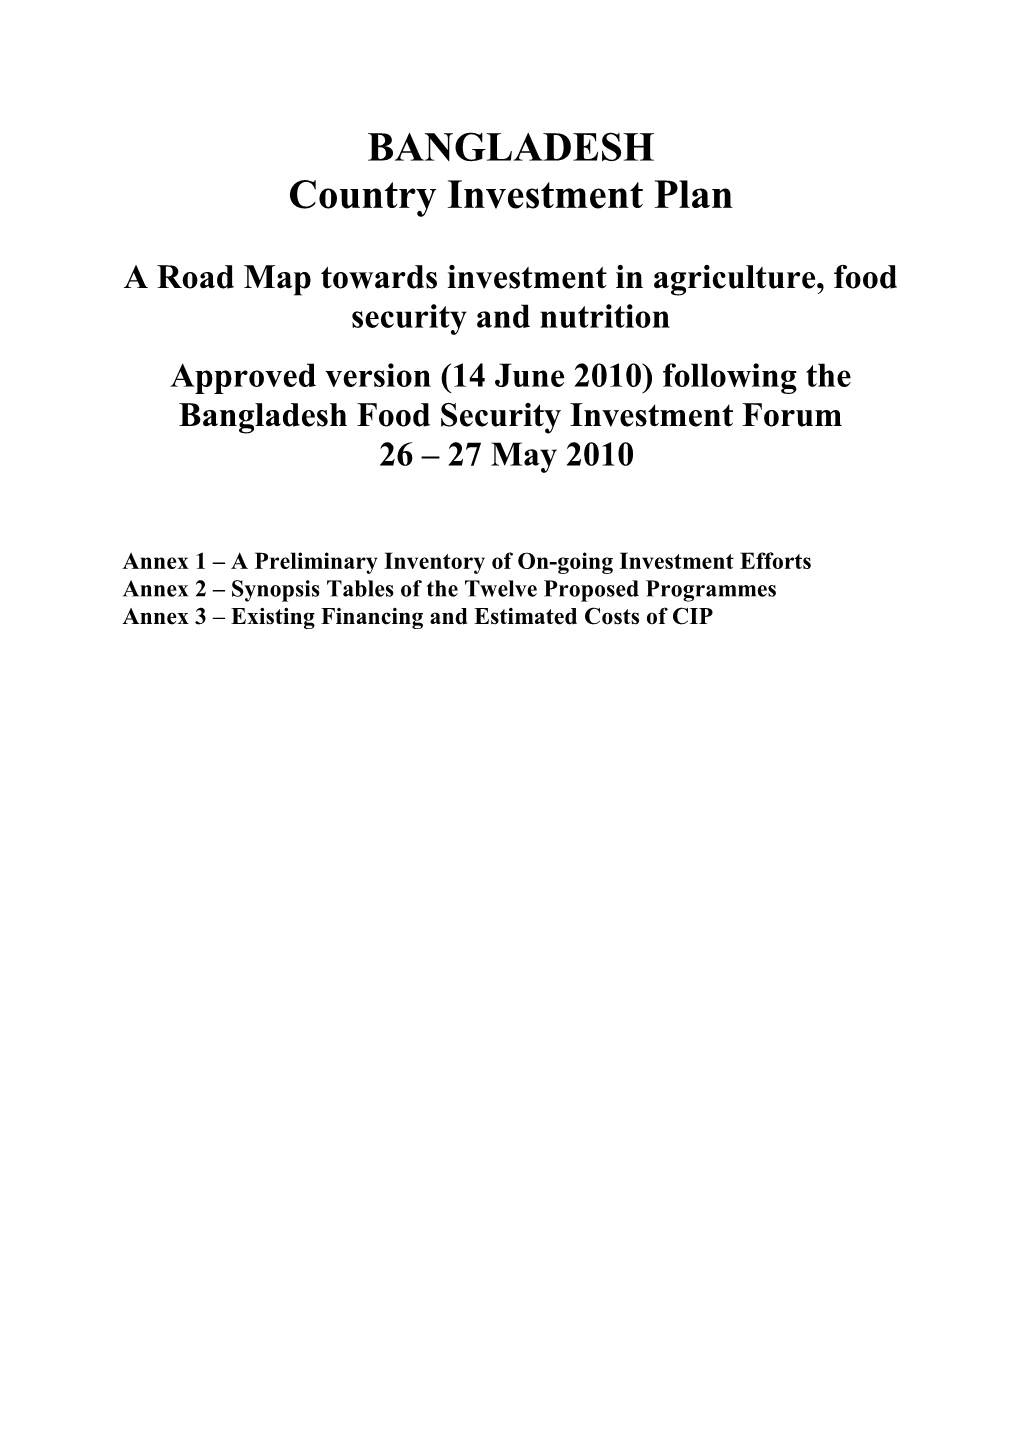 A Road Map Towards Investment in Agriculture, Food Security and Nutrition